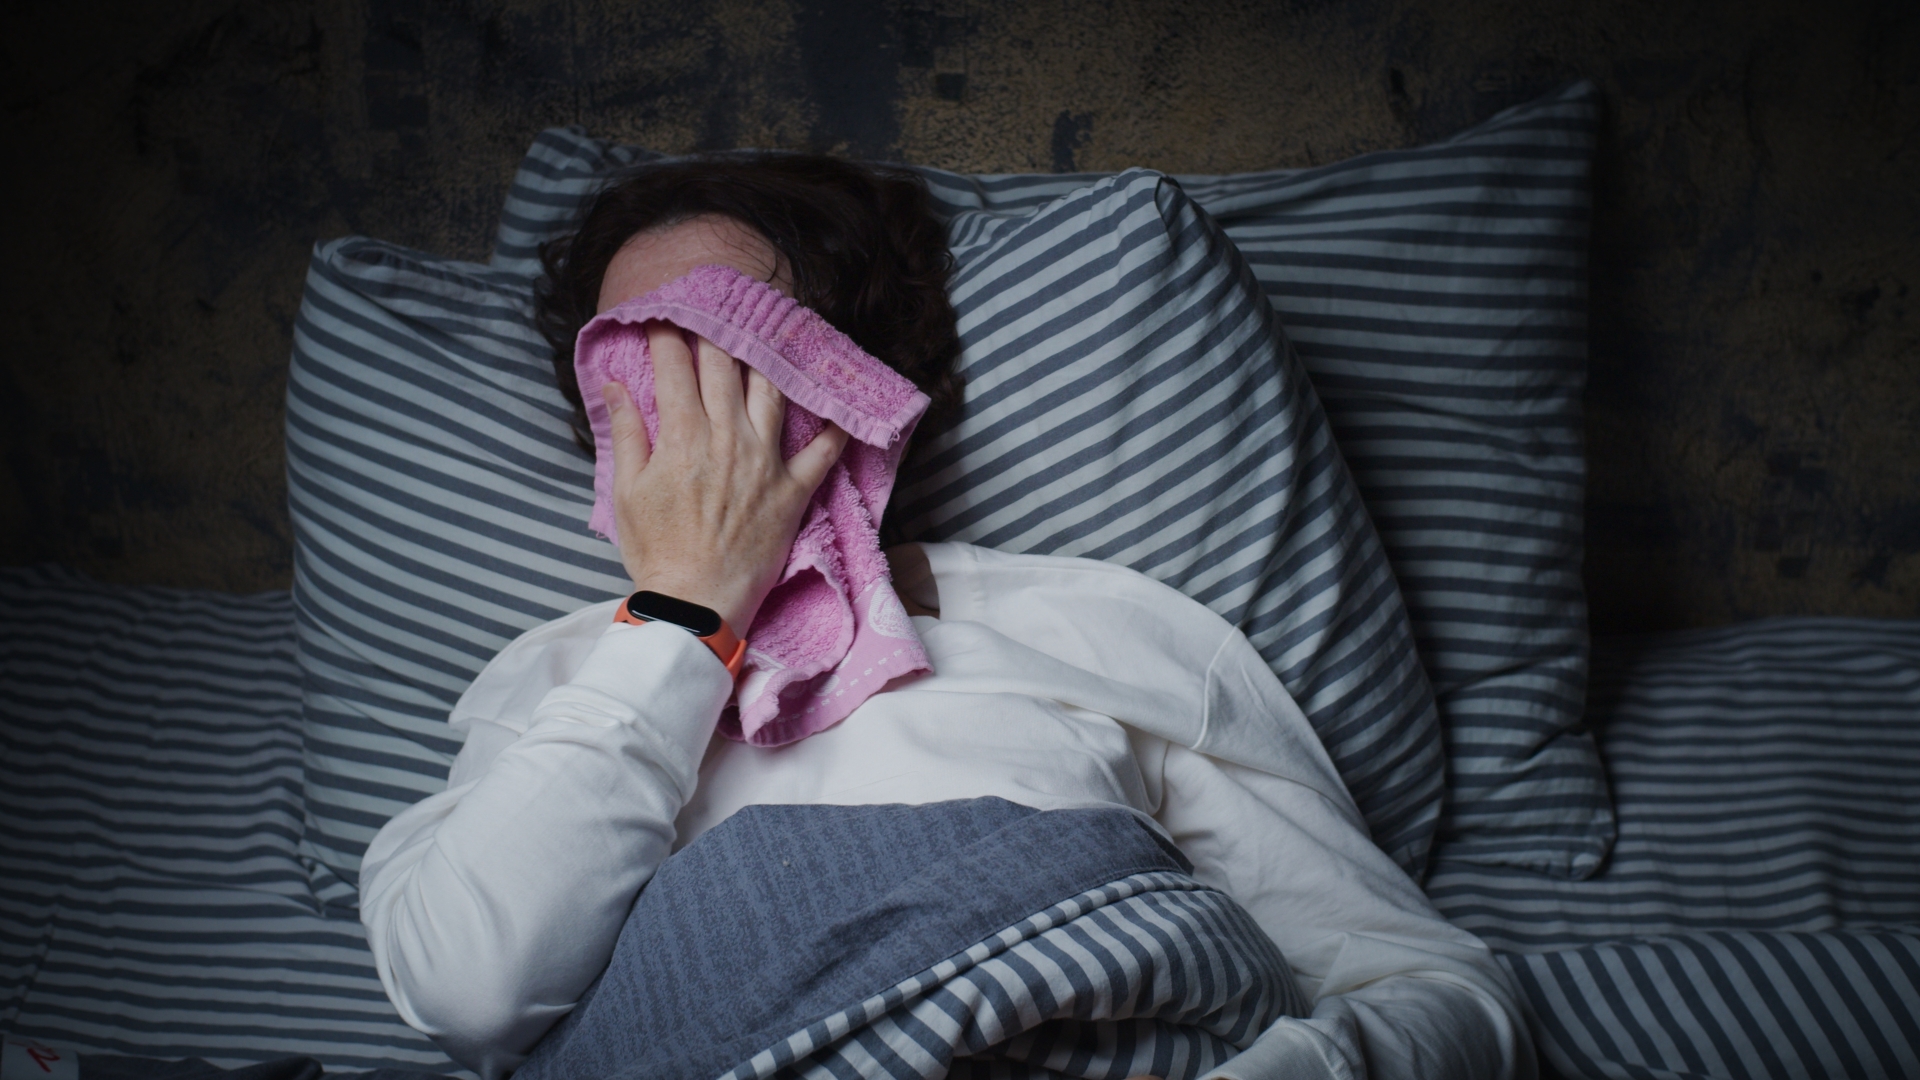 I'm a sleep expert - don't just ignore sweating at night it can be a deadly sign